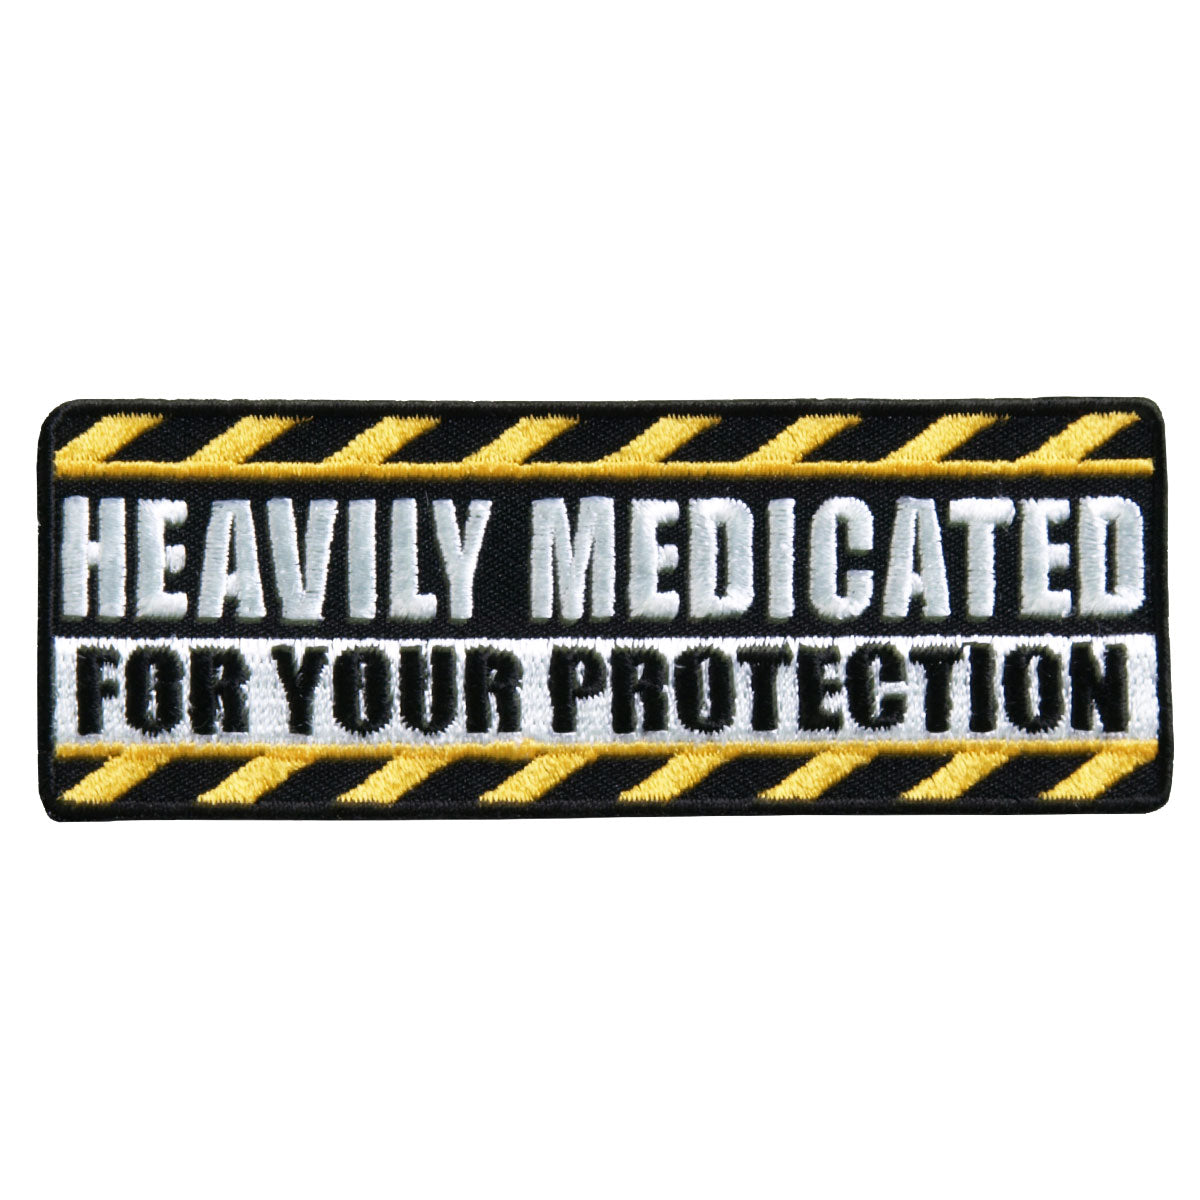 Hot Leathers PPL9382 Heavily Medicated 4" x 2" Patch